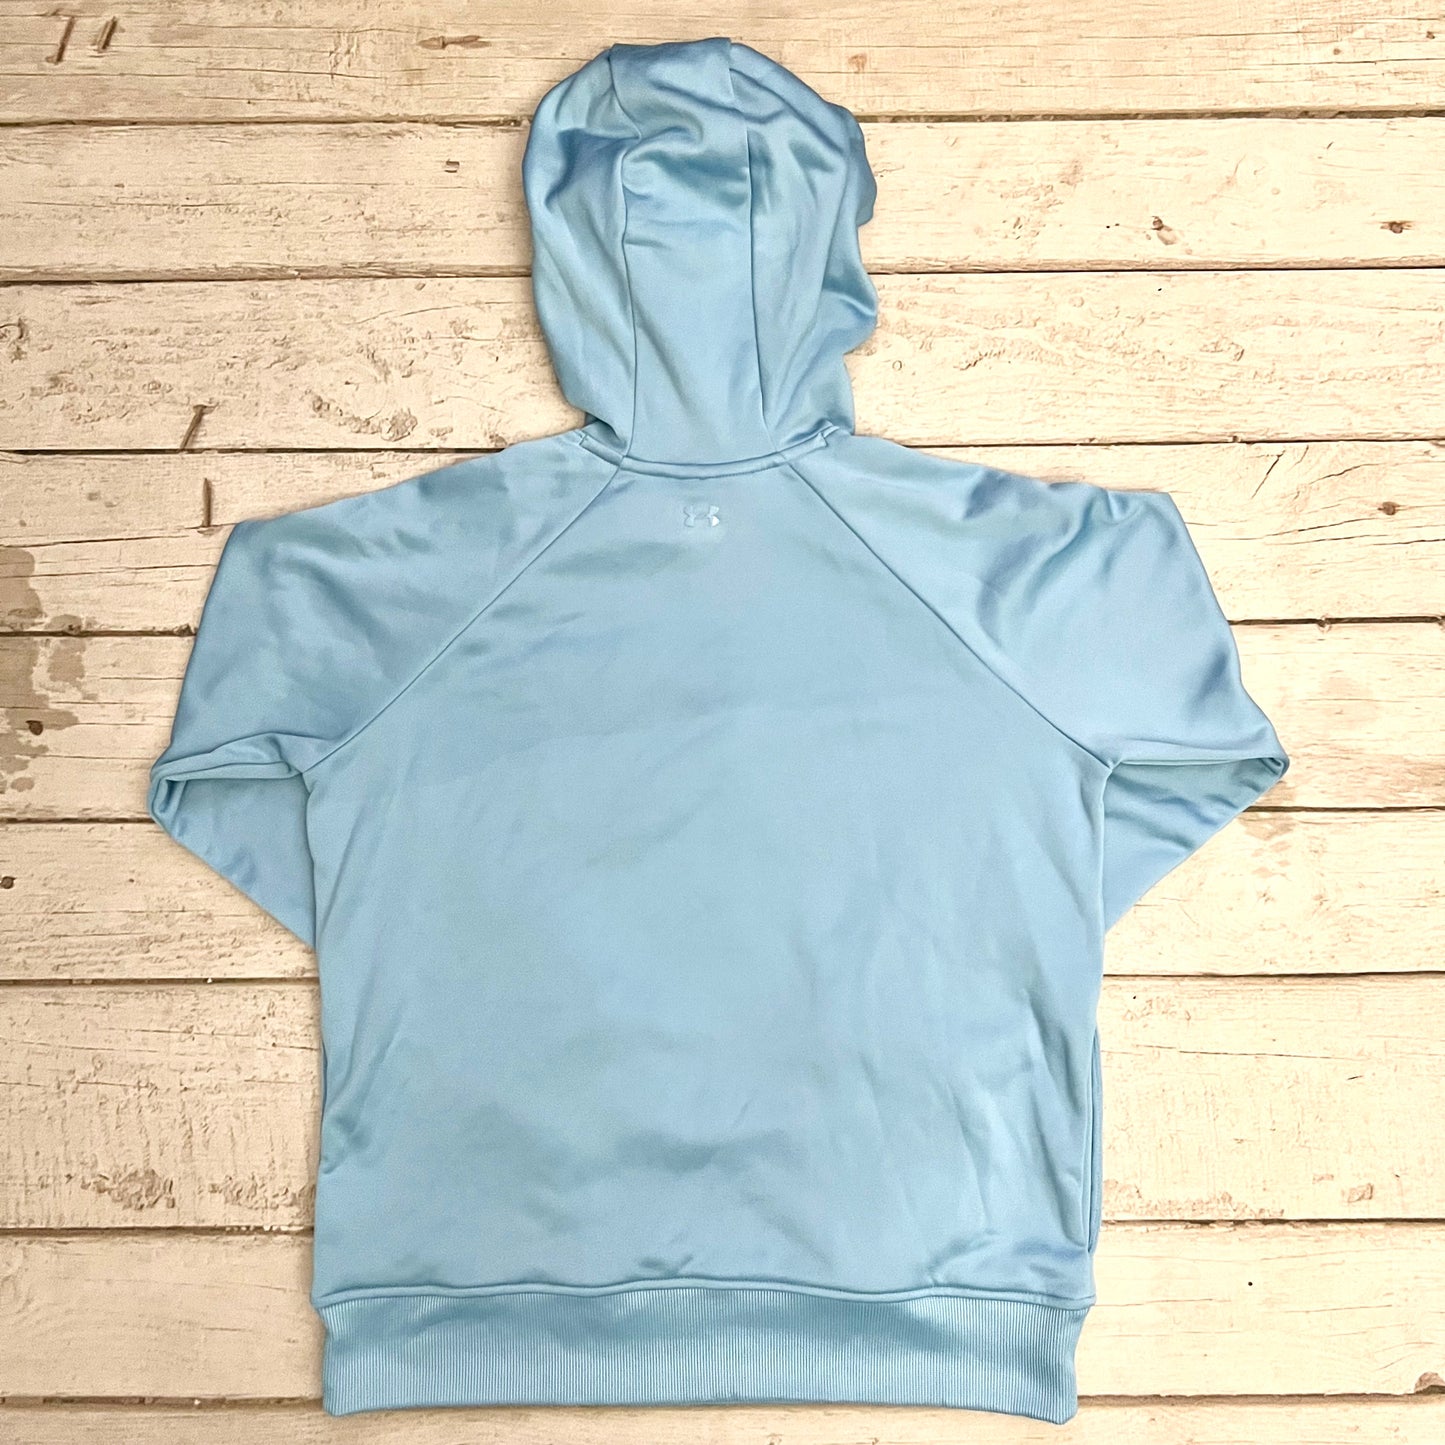 Athletic Sweatshirt Hoodie By Under Armour  Size: L